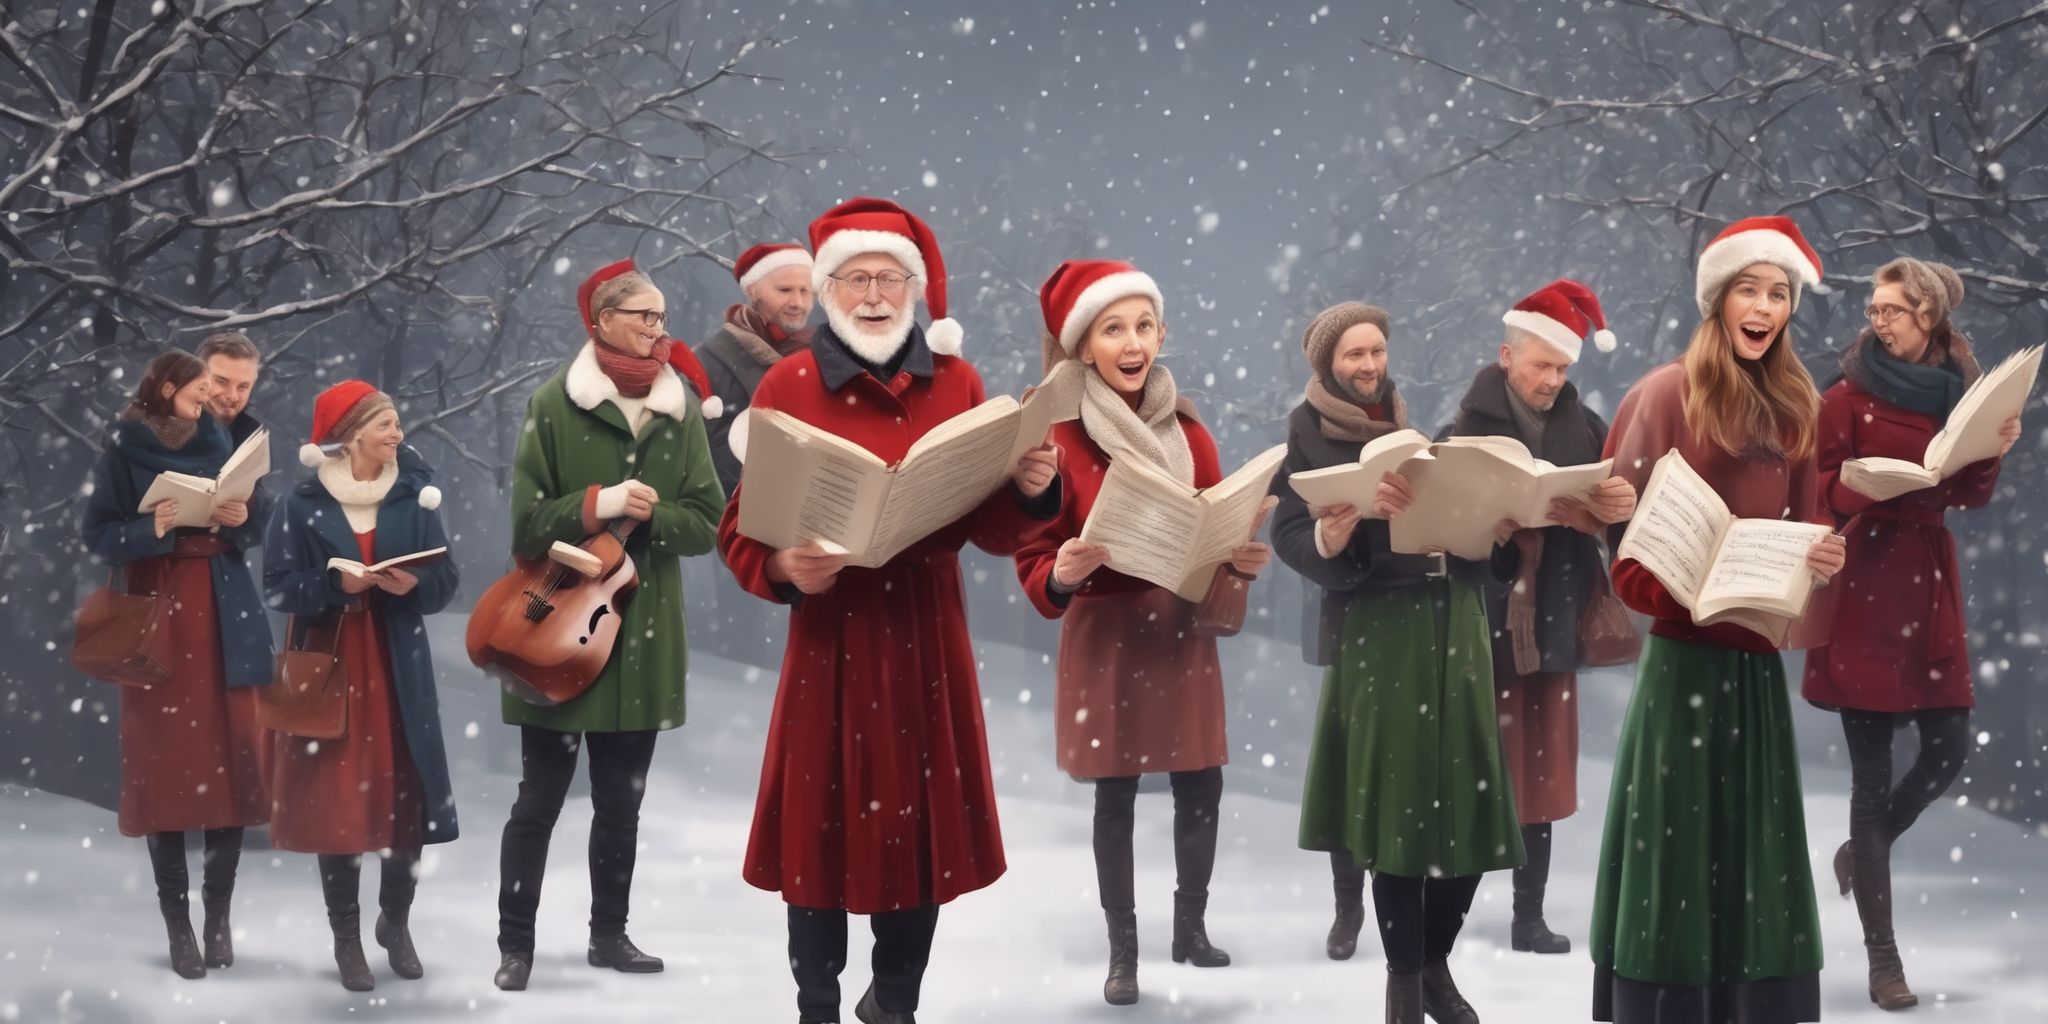 Carol singers in realistic Christmas style